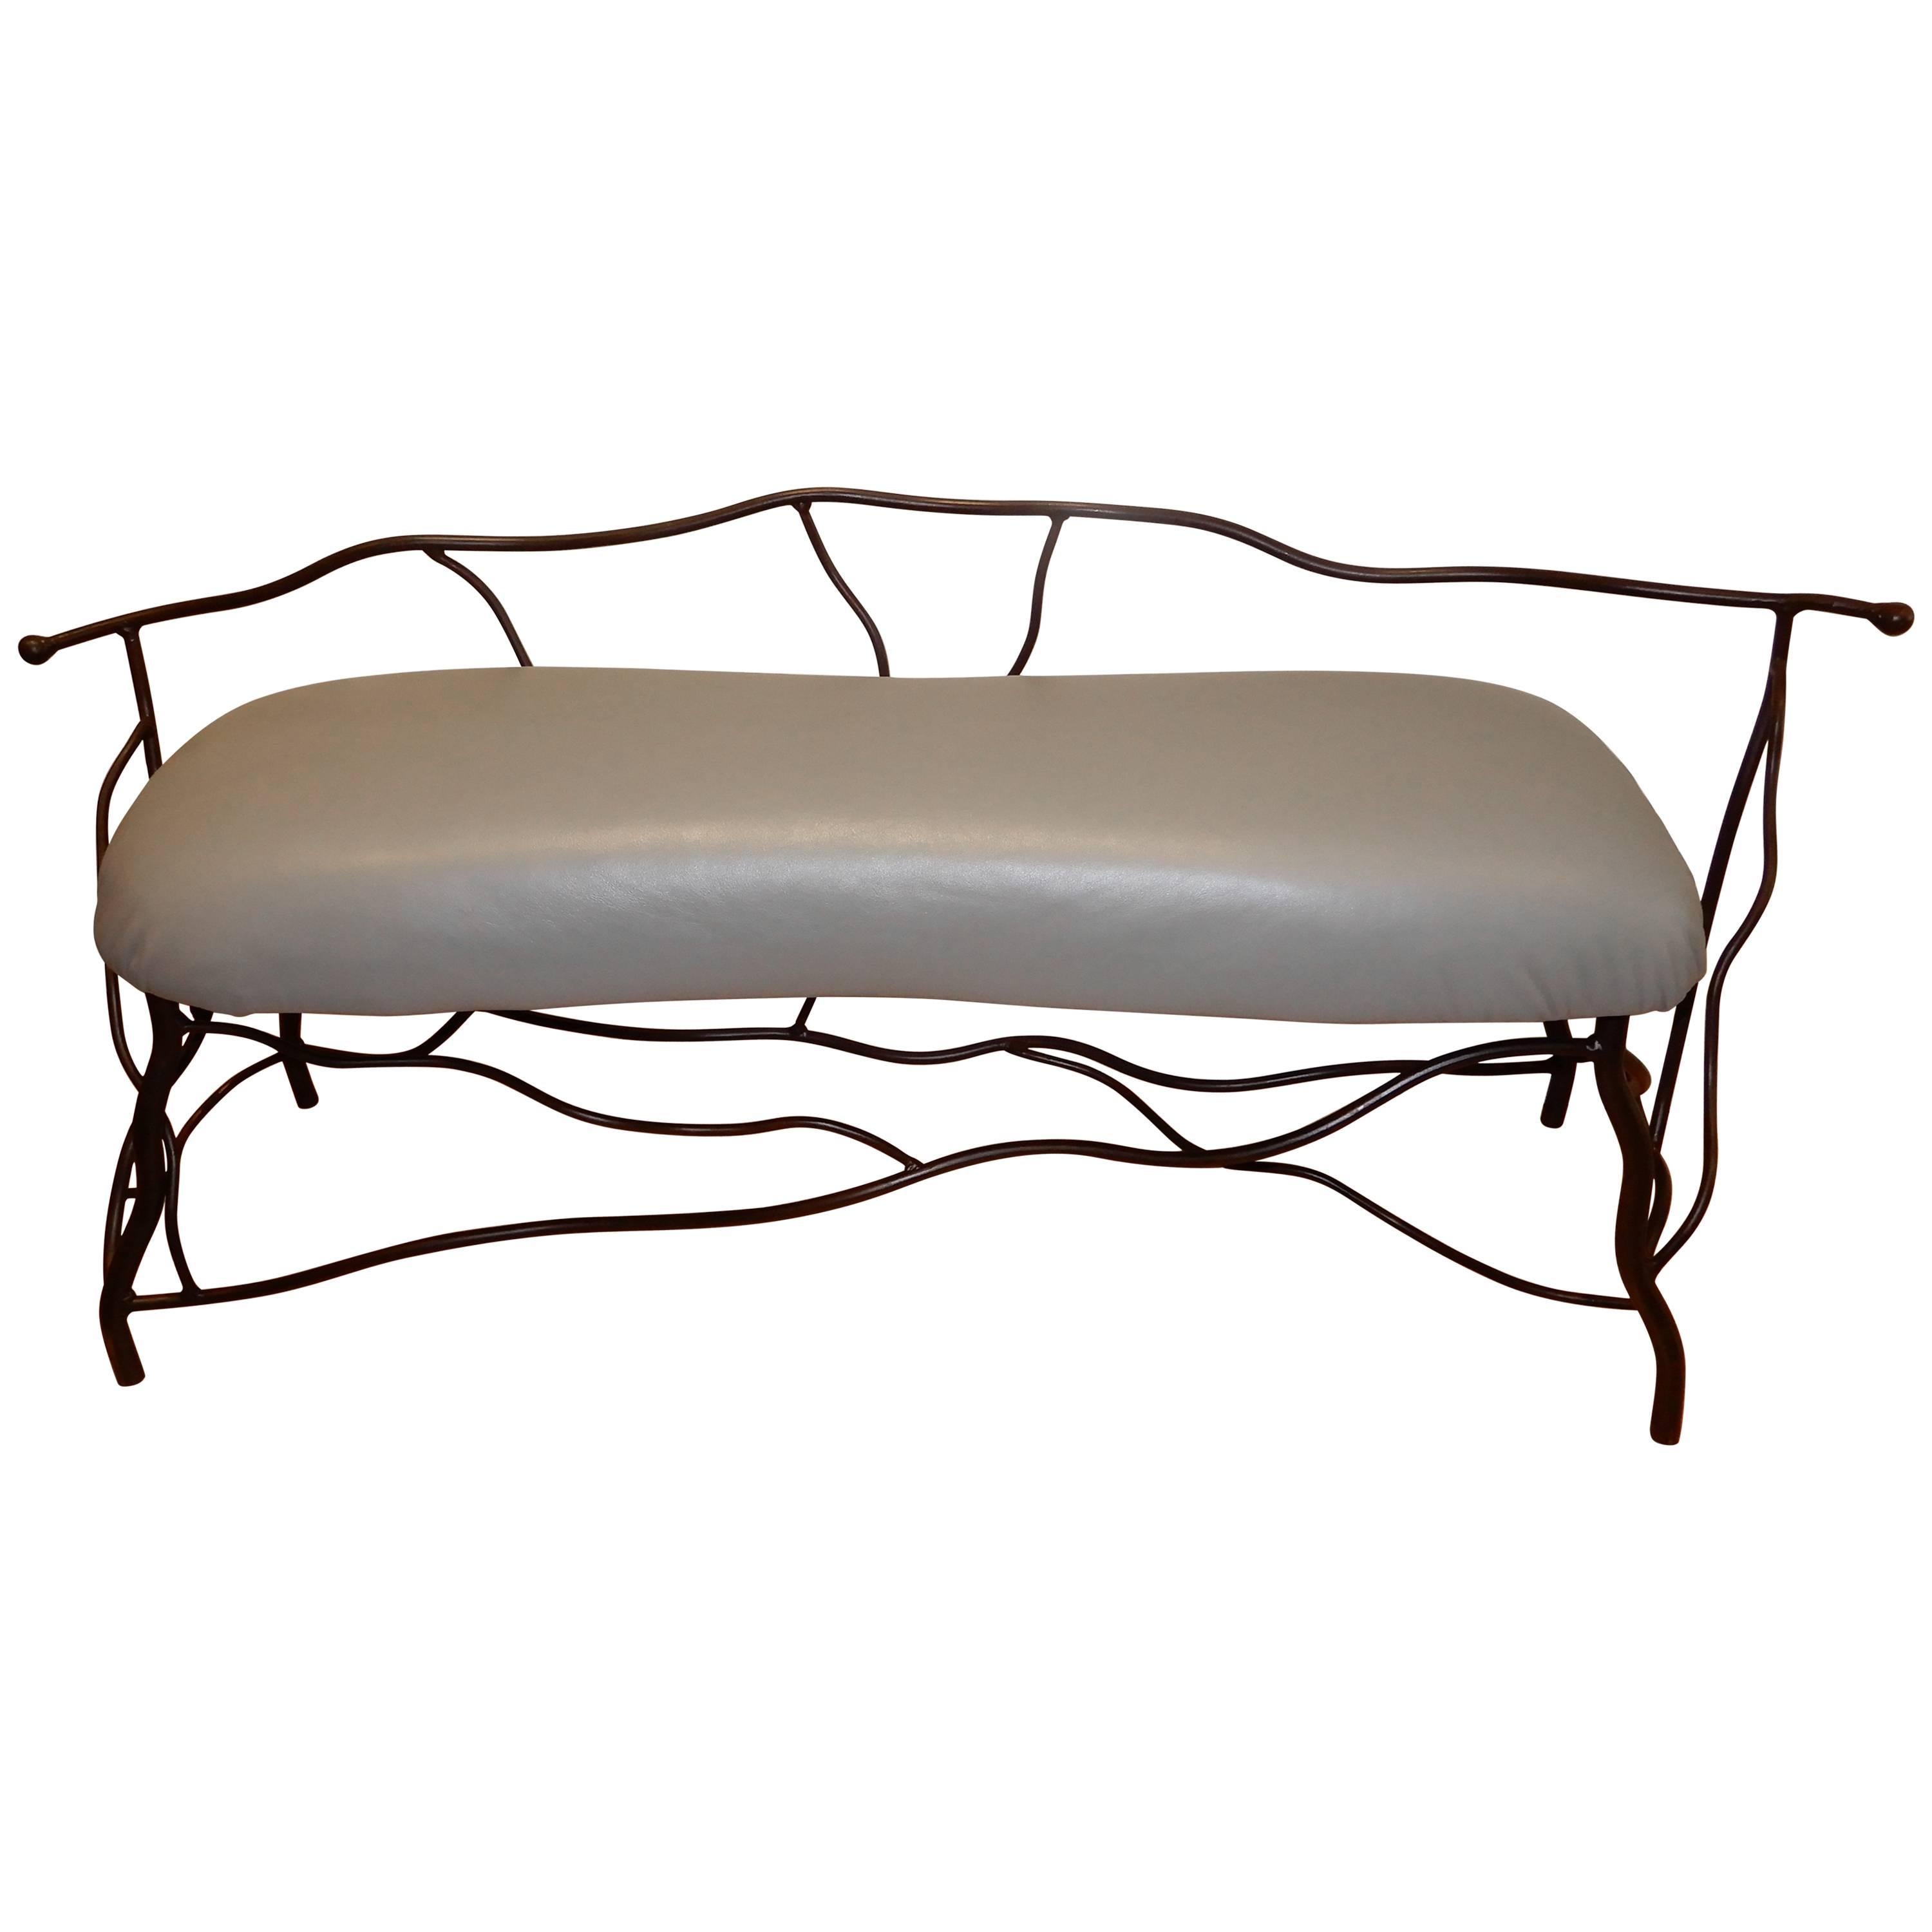 Studio Crafted Giacometti Style Sculptural Iron and Leather Bench